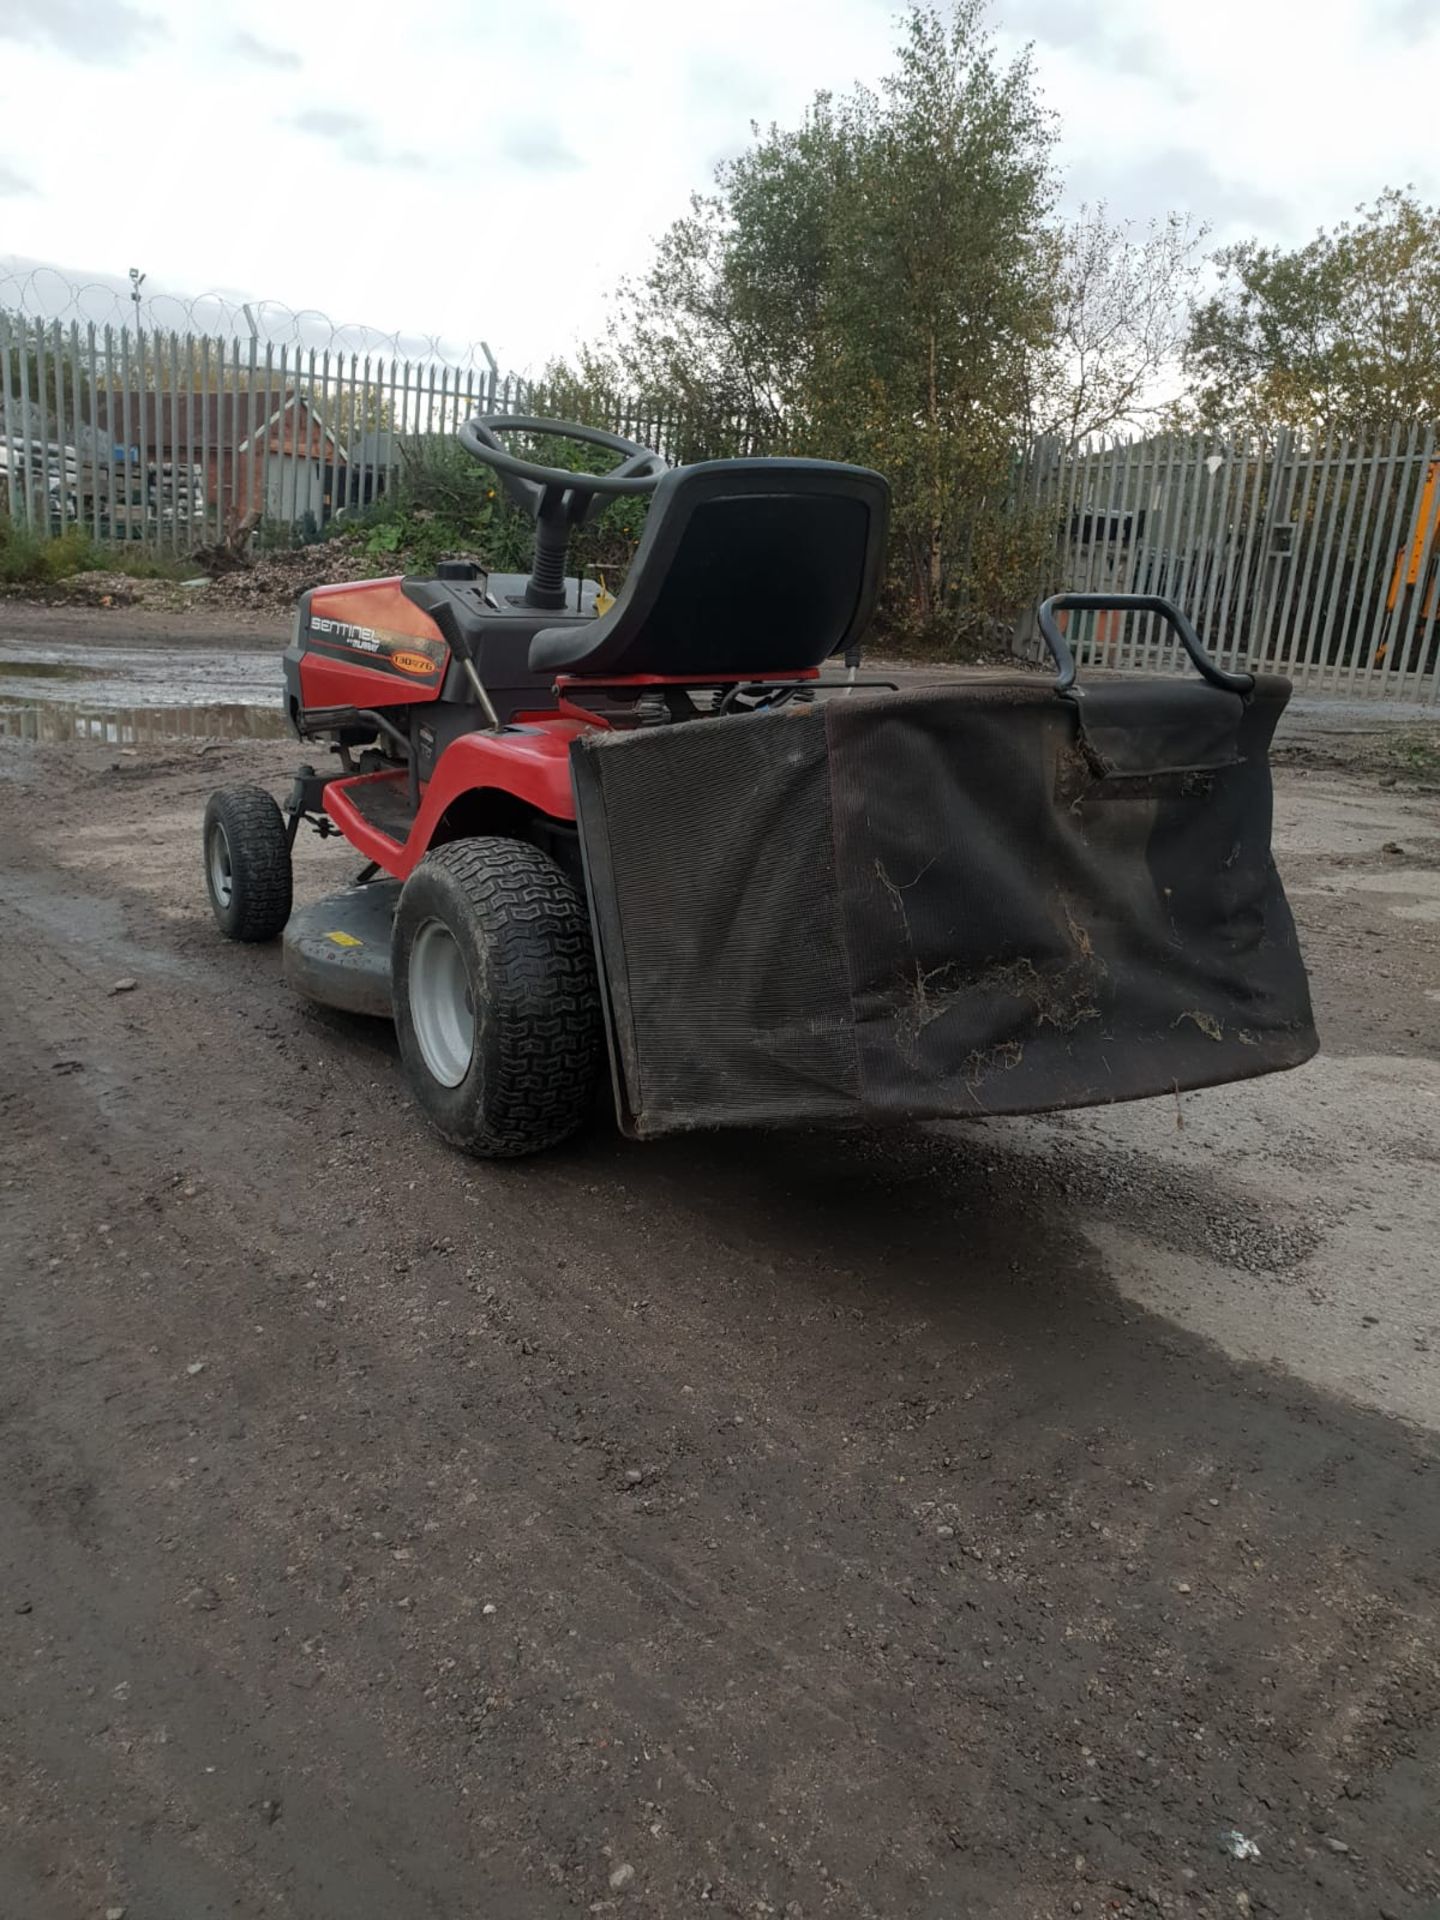 SENTINEL BY MURRAY 130 IC 76 RIDE ON LAWN MOWER WITH COLLECTOR, WORKING ORDER *NO VAT* - Image 10 of 10